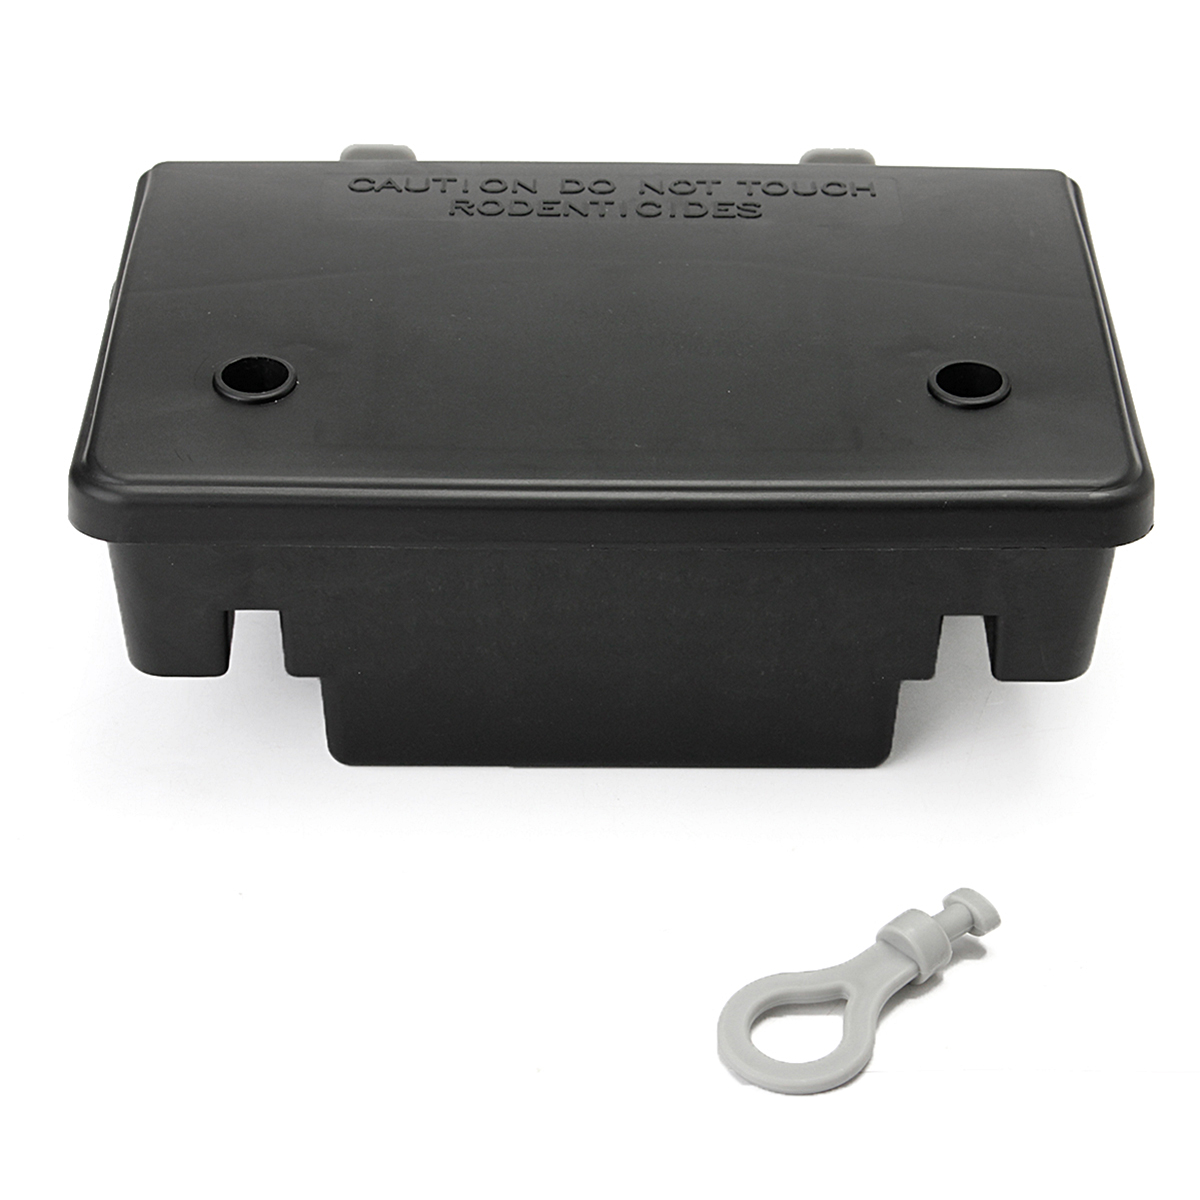 Professional-Rodent-Bait-Block-Station-Box-Case-Trap-with-Key-For-Rat-Mouse-Mice-1244365-6